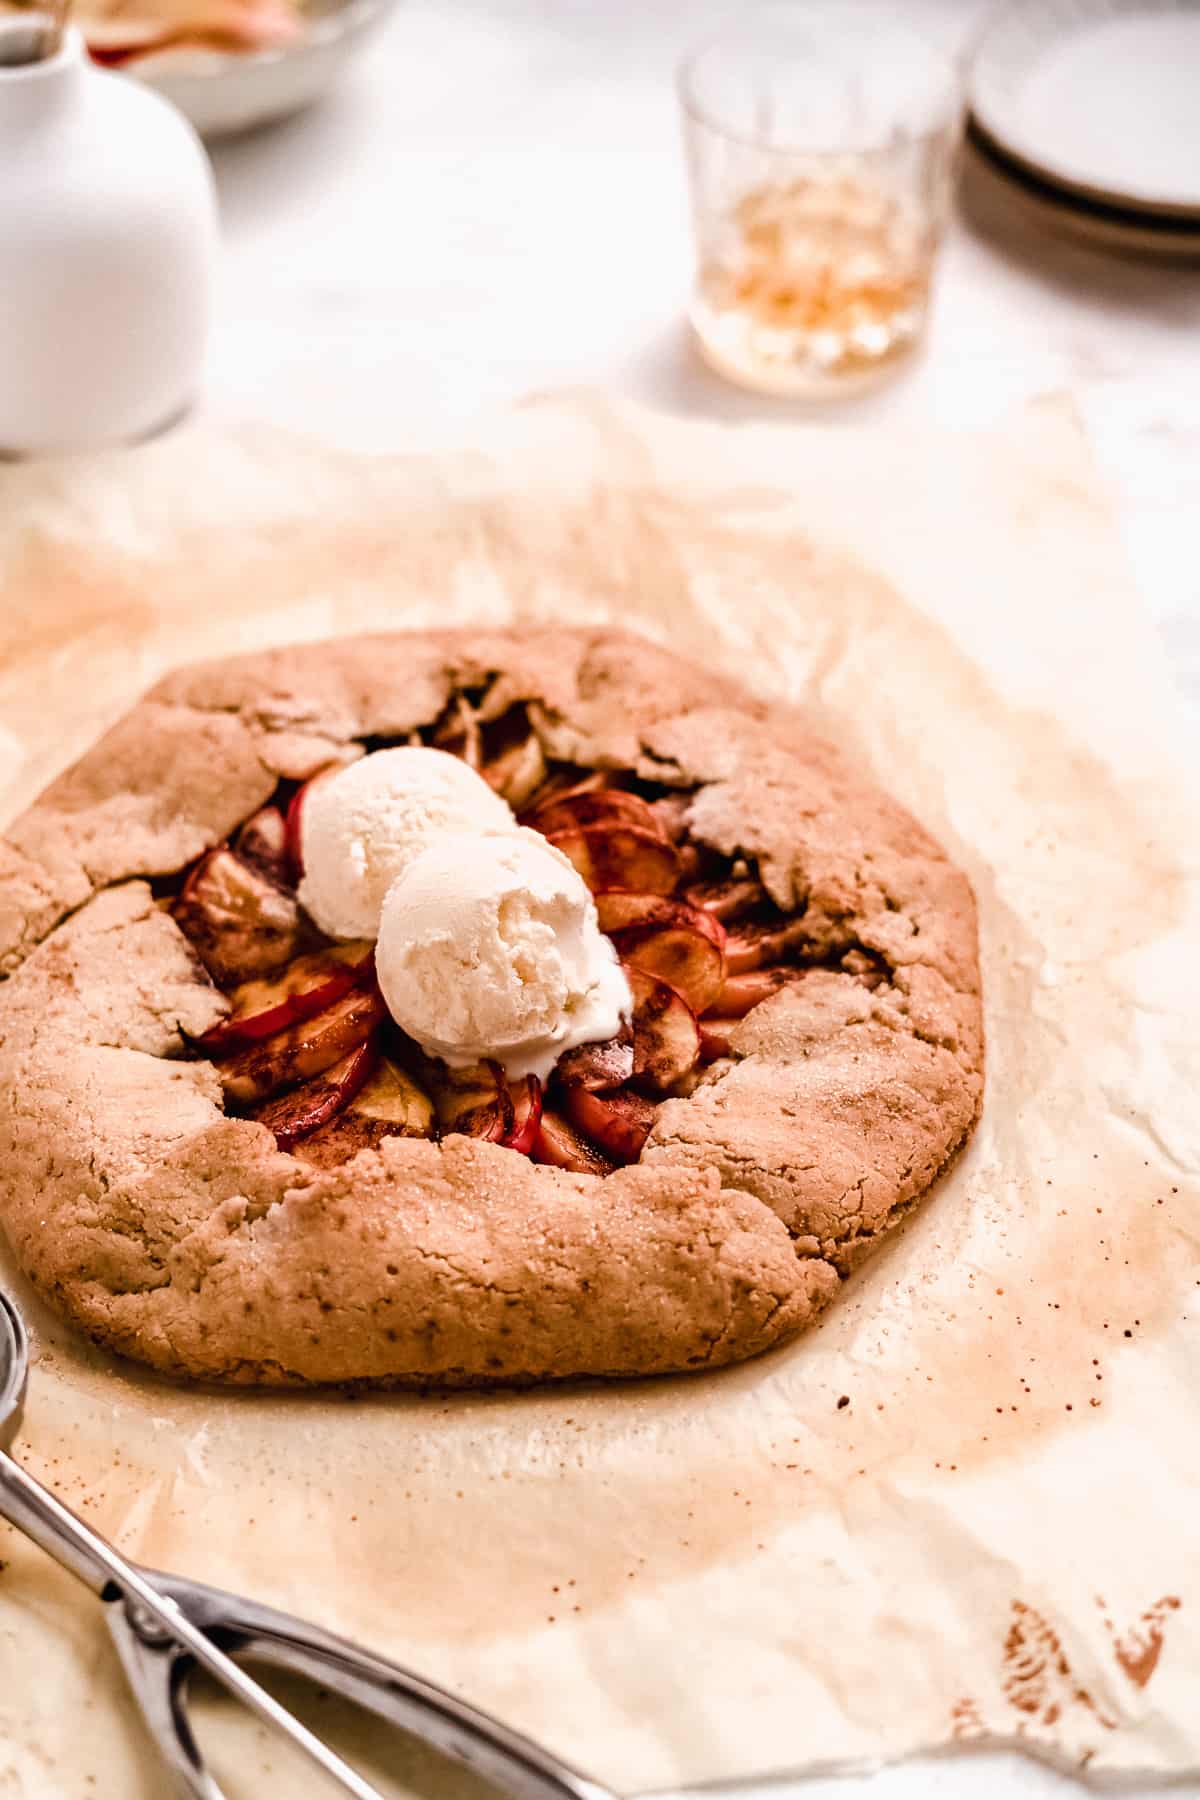 Overhead view of baked Bourbon Apple Galette on parchment paper with two scoops of vanilla ice cream.  